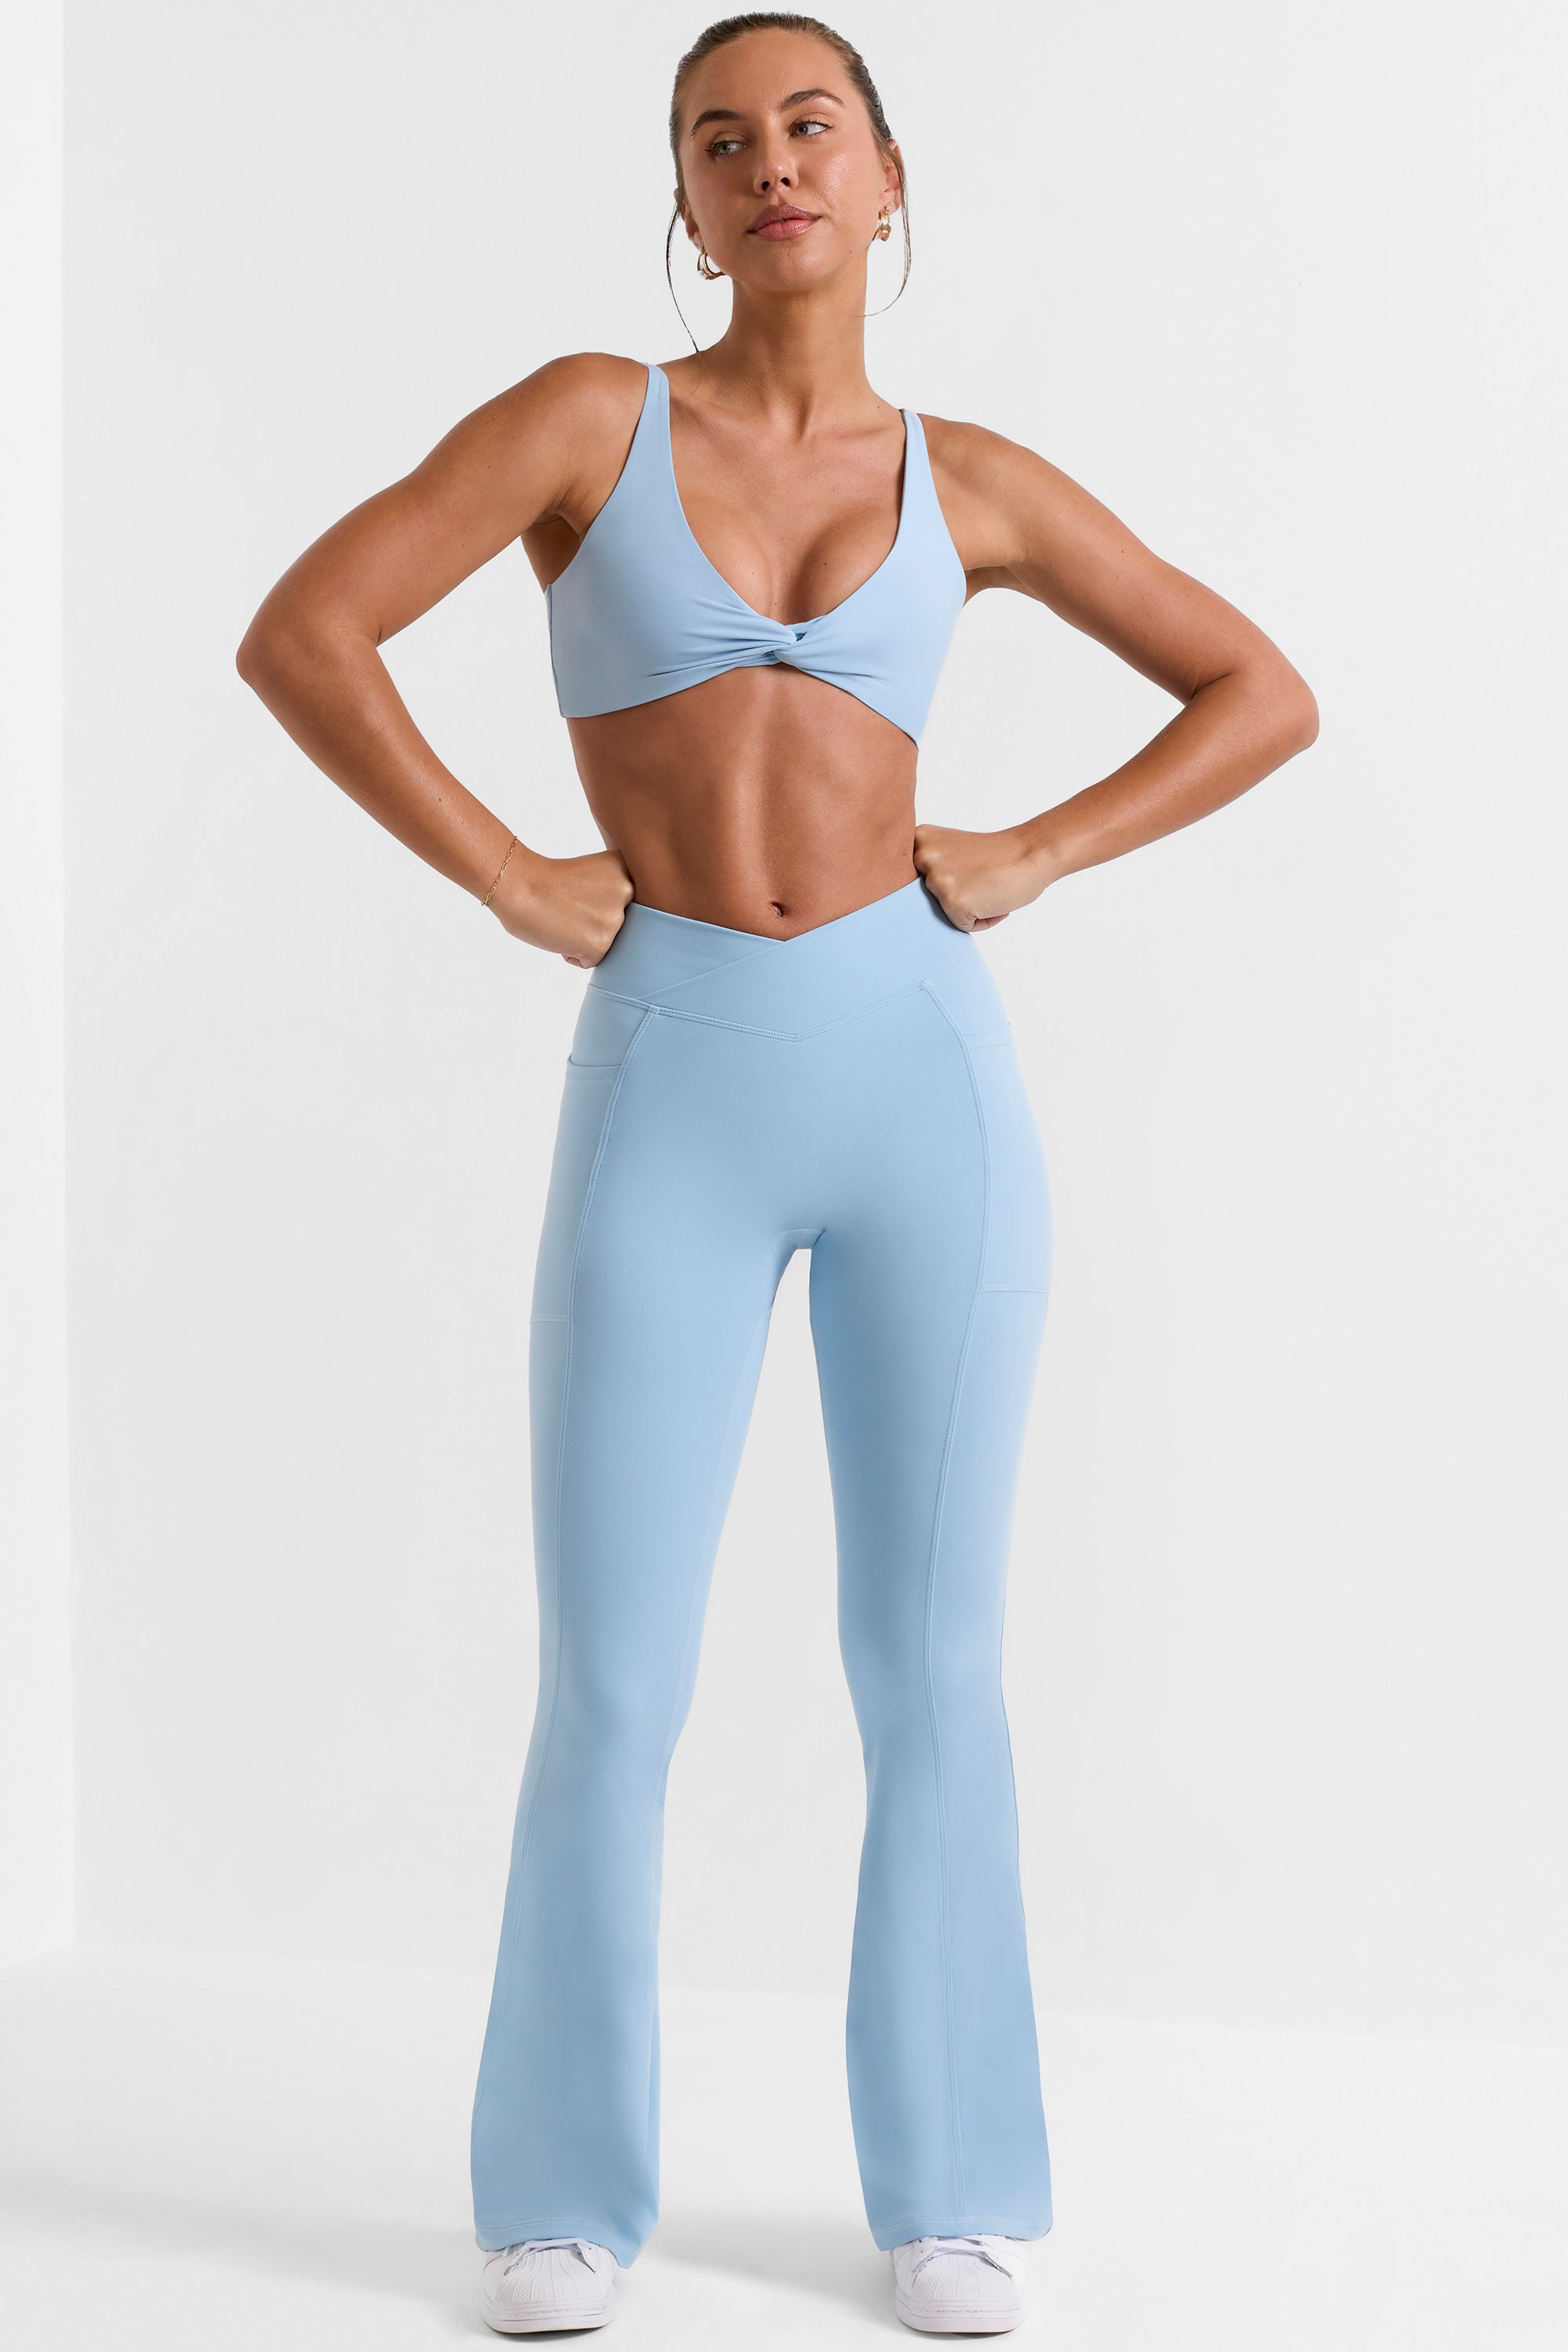 Danniella Westbrook works up a sweat in blue crop top and matching leggings  - OK! Magazine